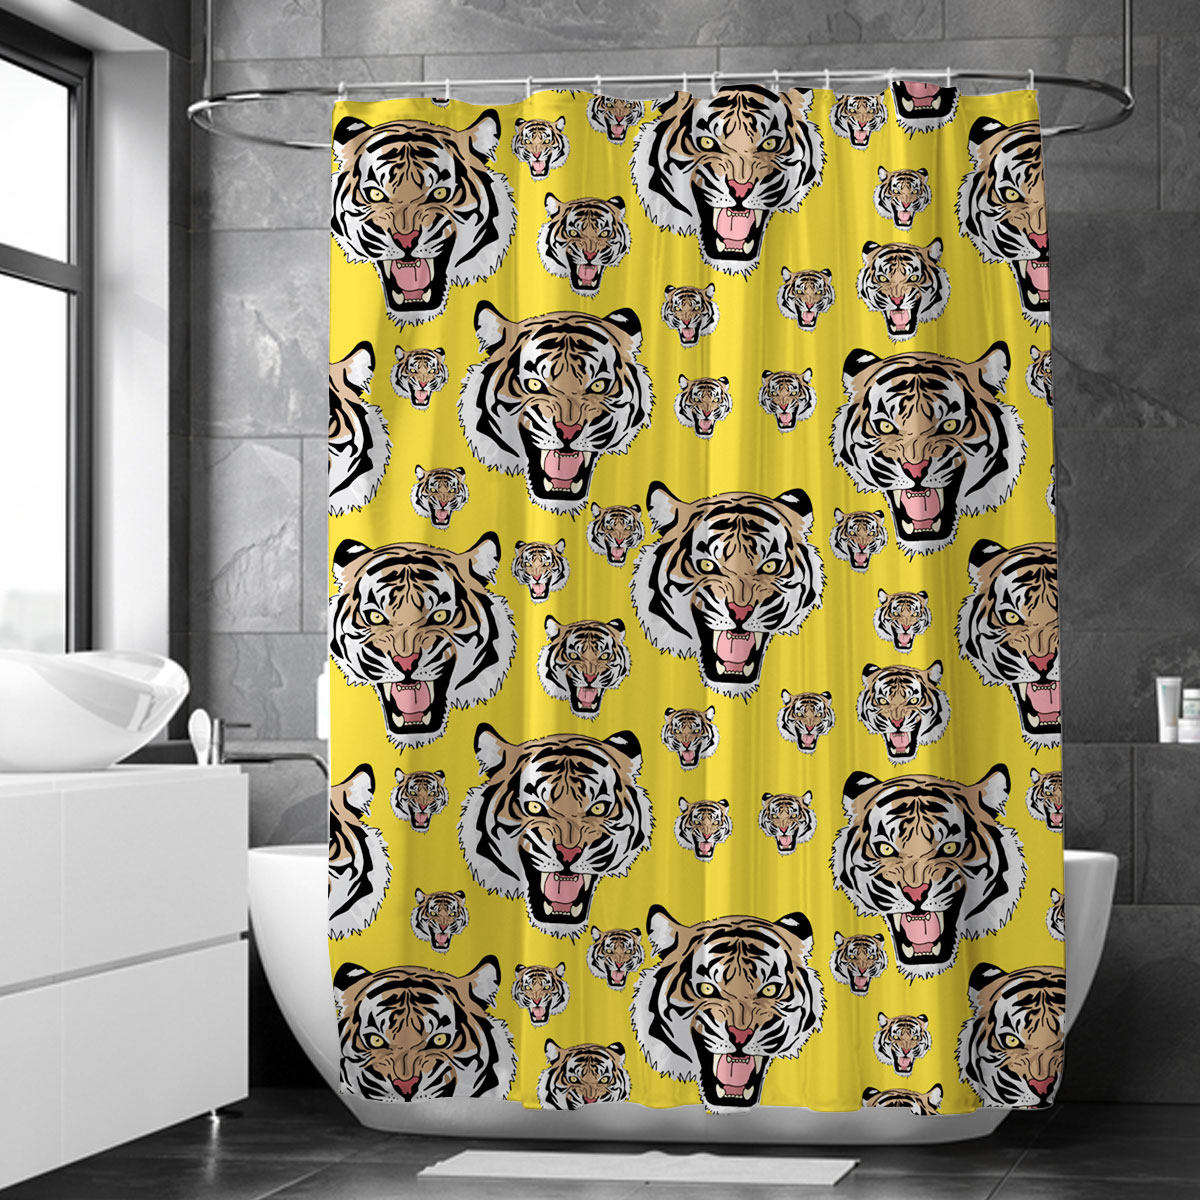 Tiger Face Shower Curtain 6